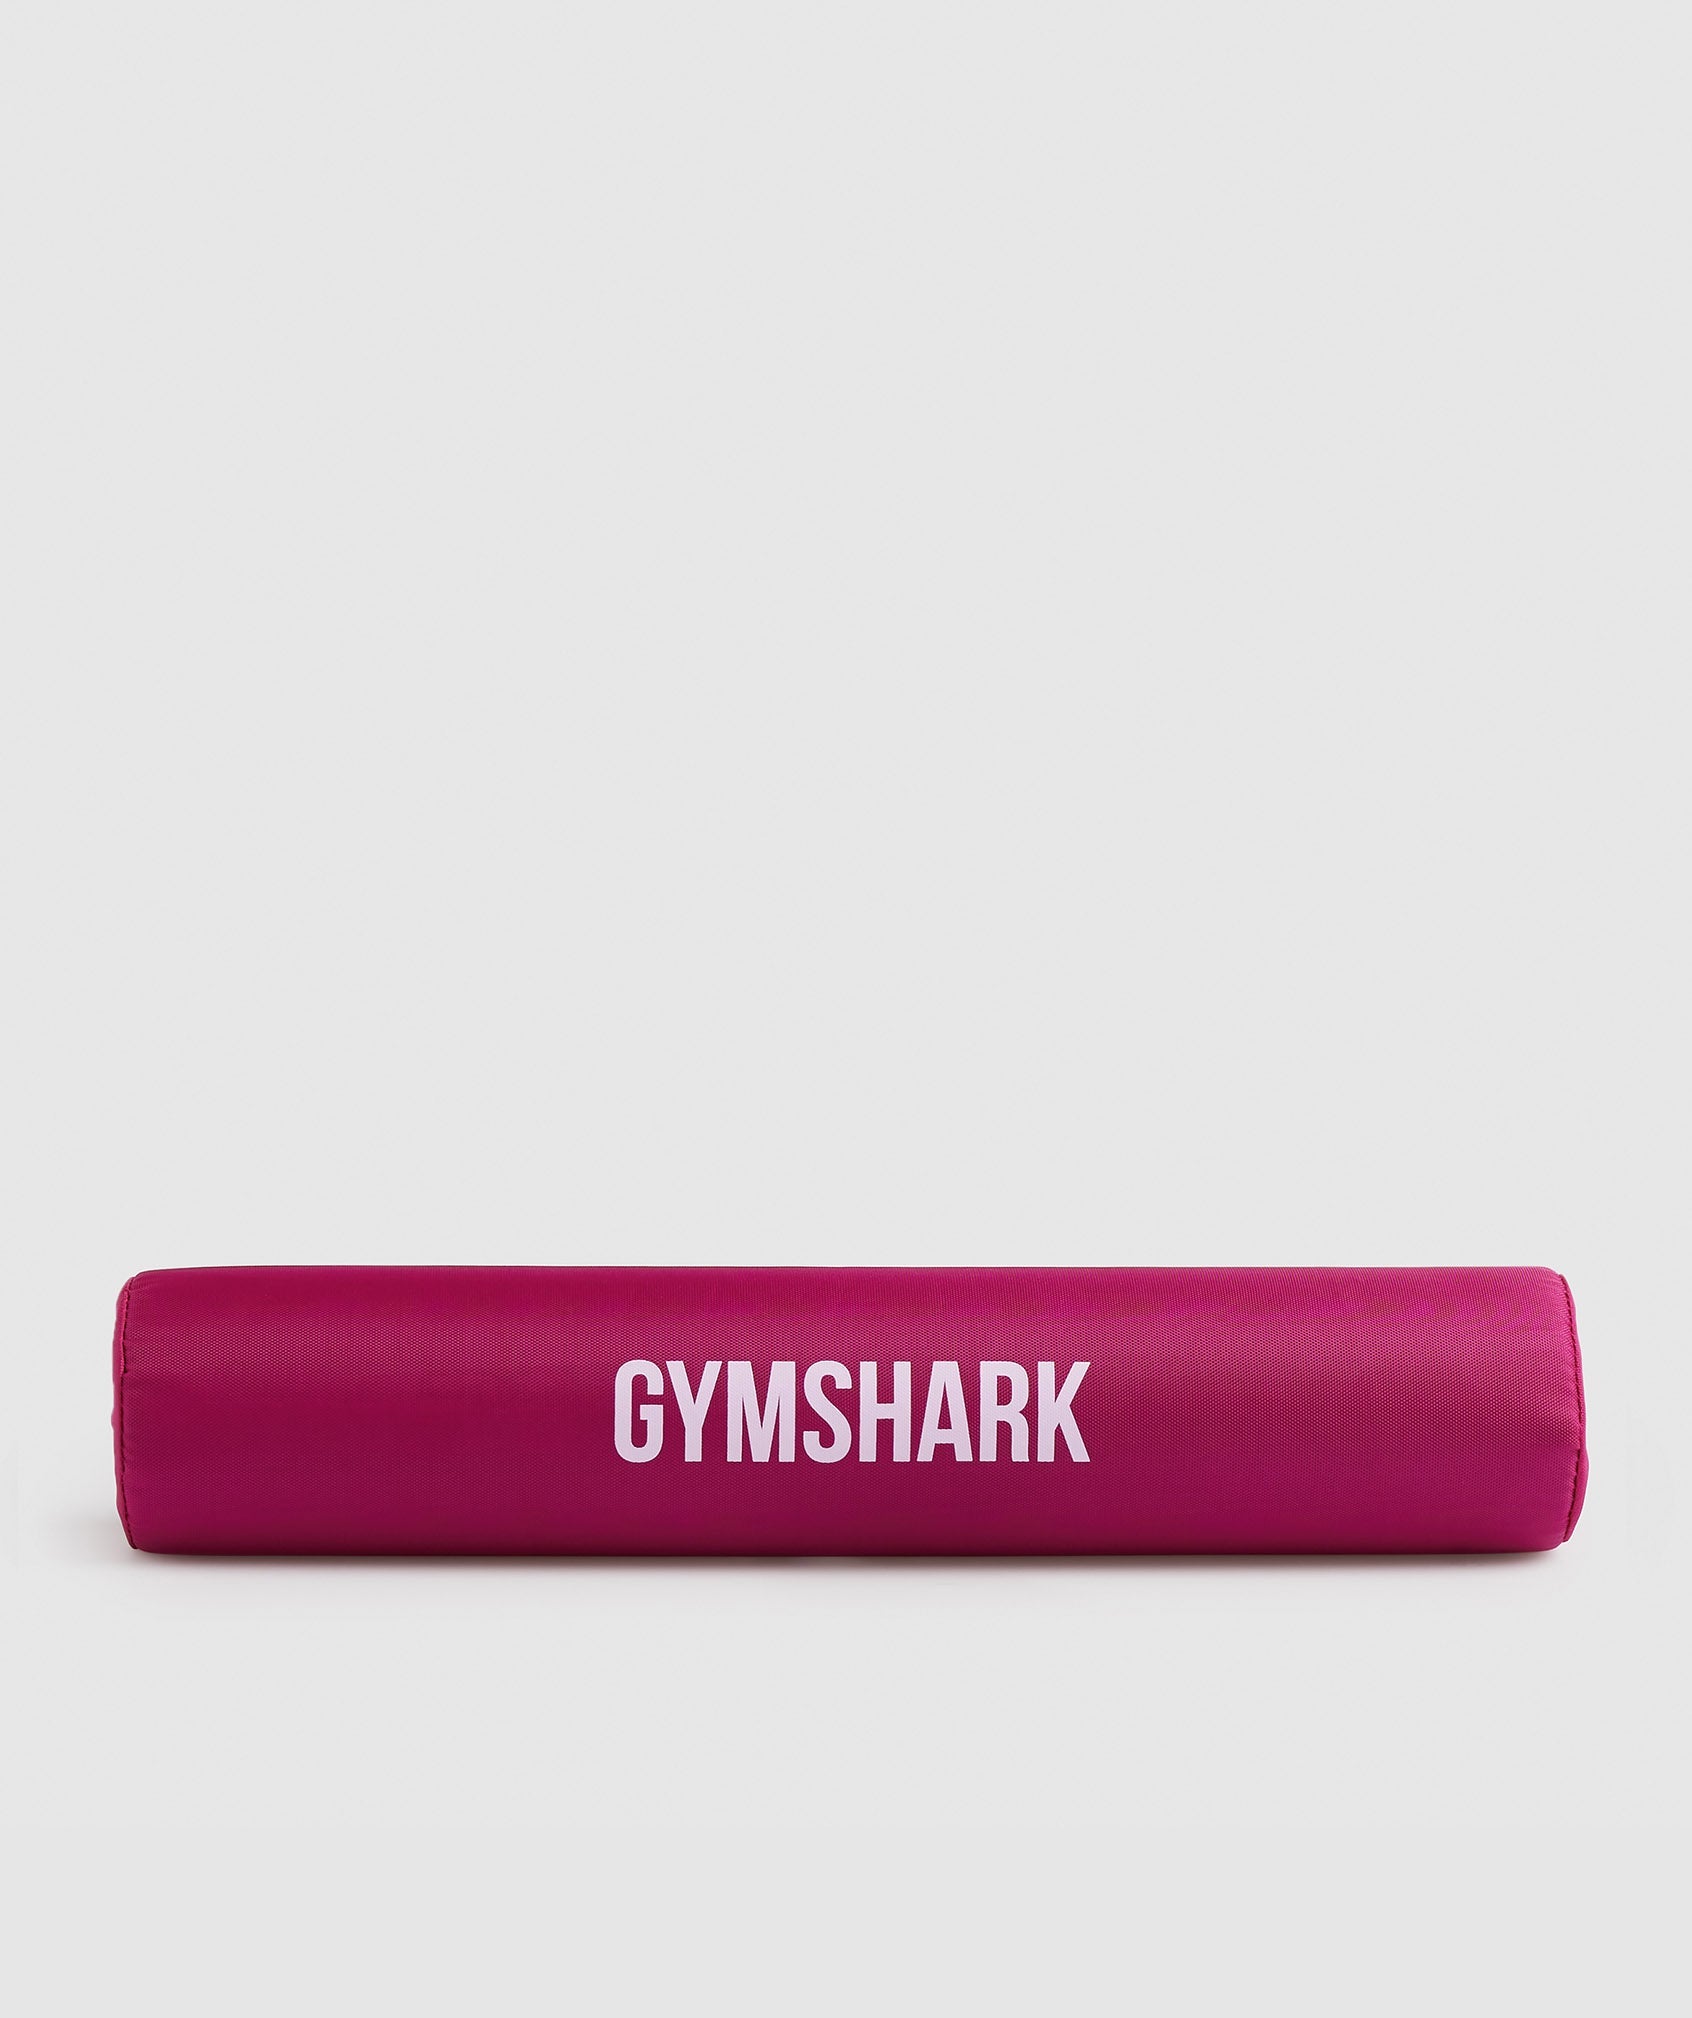 Barbell Pad in Magenta Pink - view 1